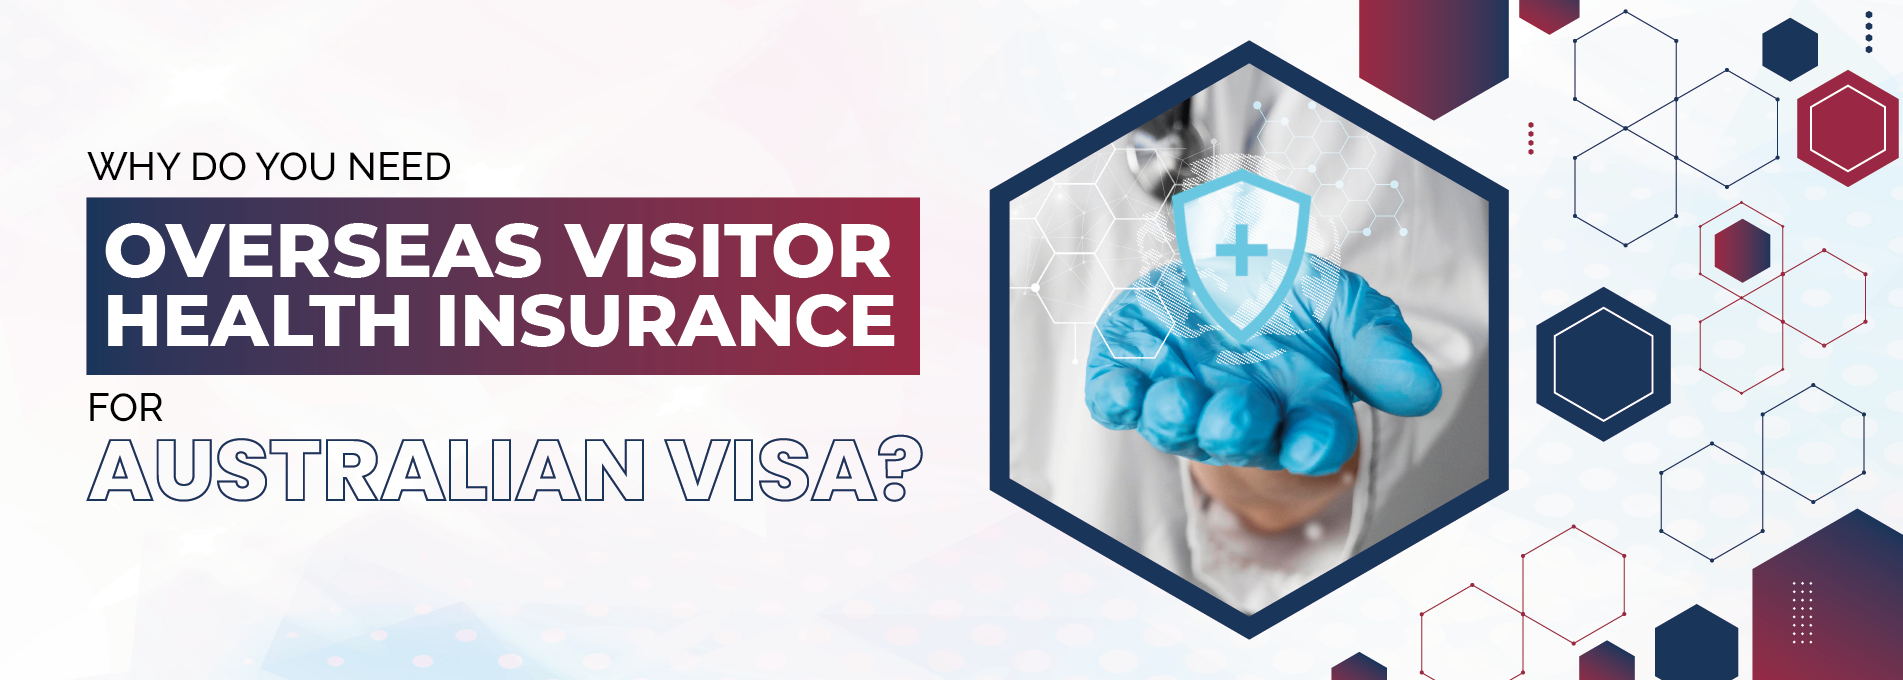 Why do you need Overseas Visitor Health Insurance for Australian Visa?